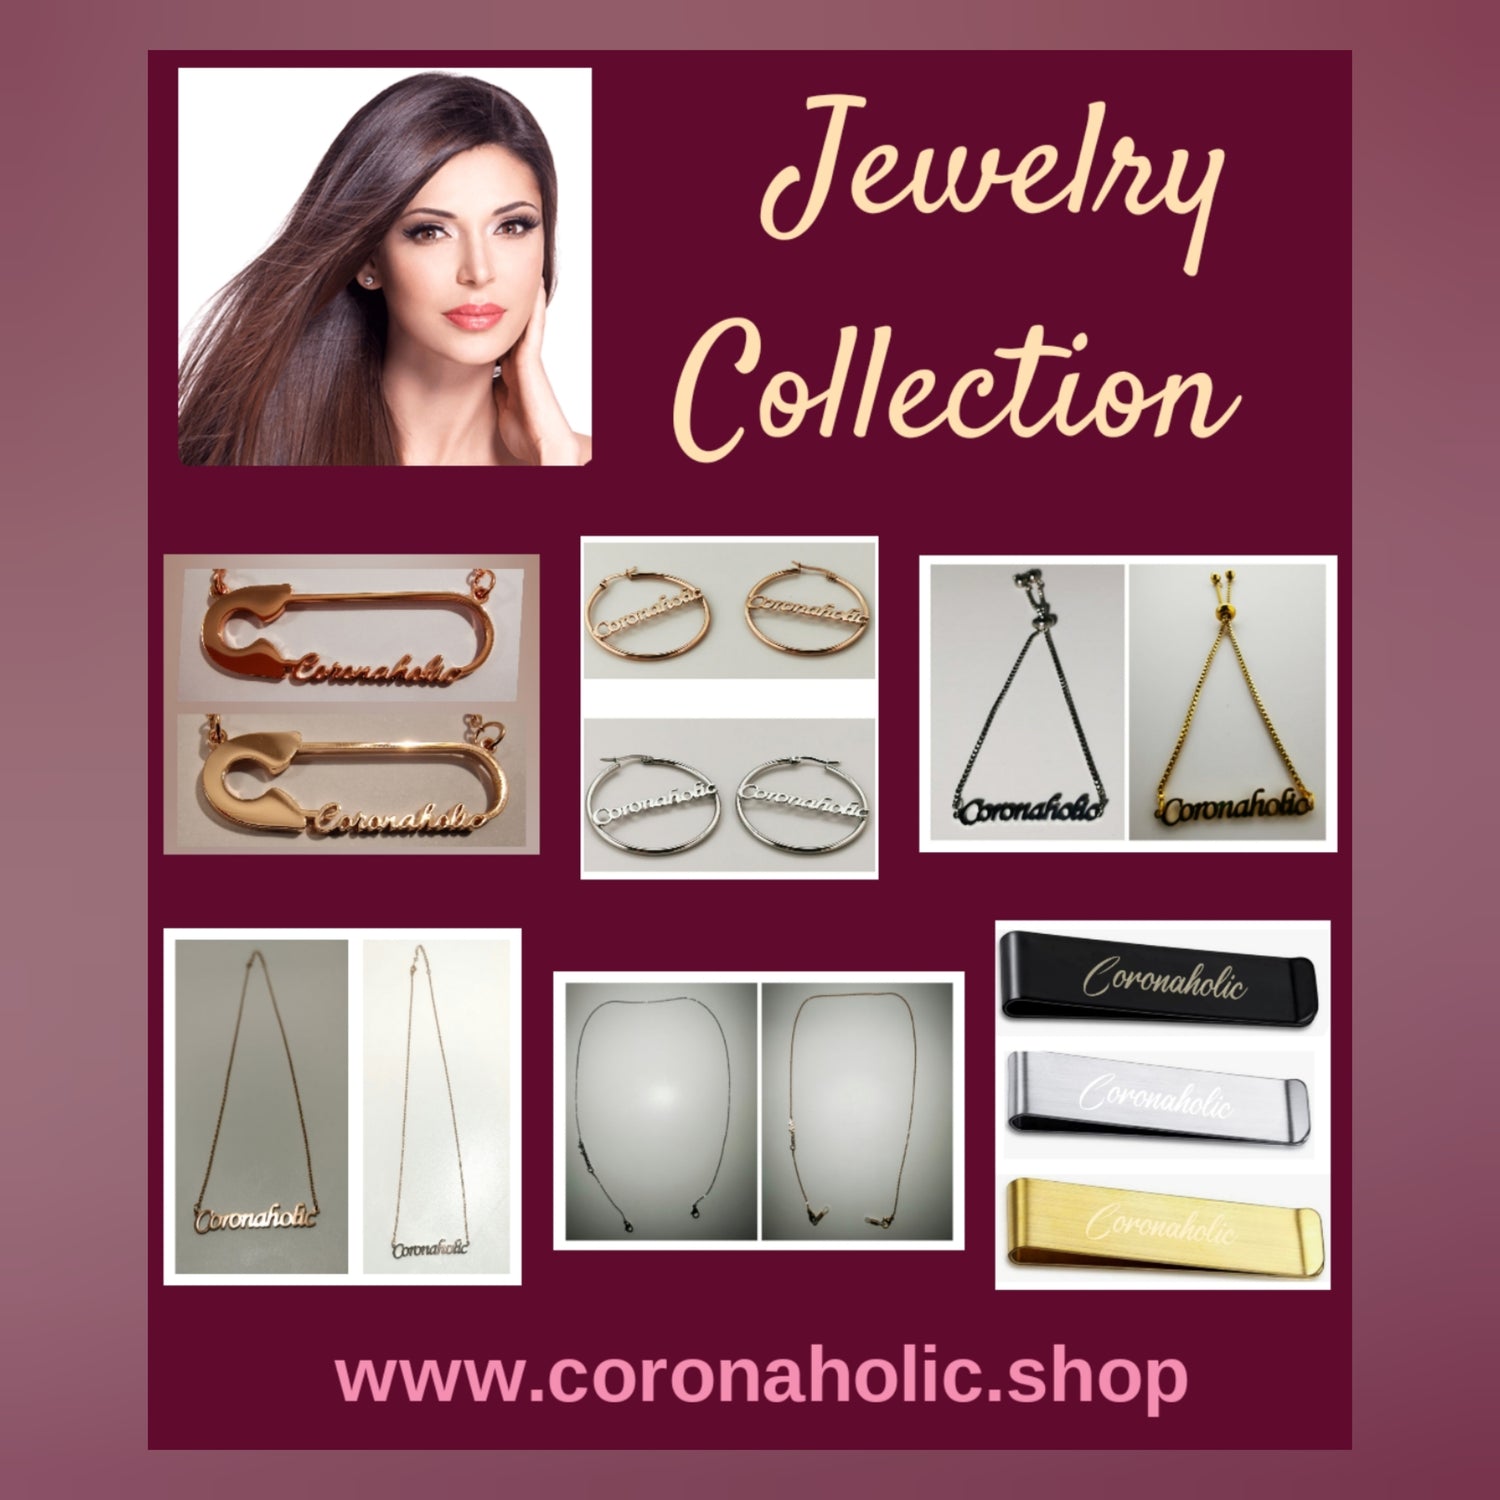 "Jewelry Collections" 

made by CORONAHOLIC Design&Label